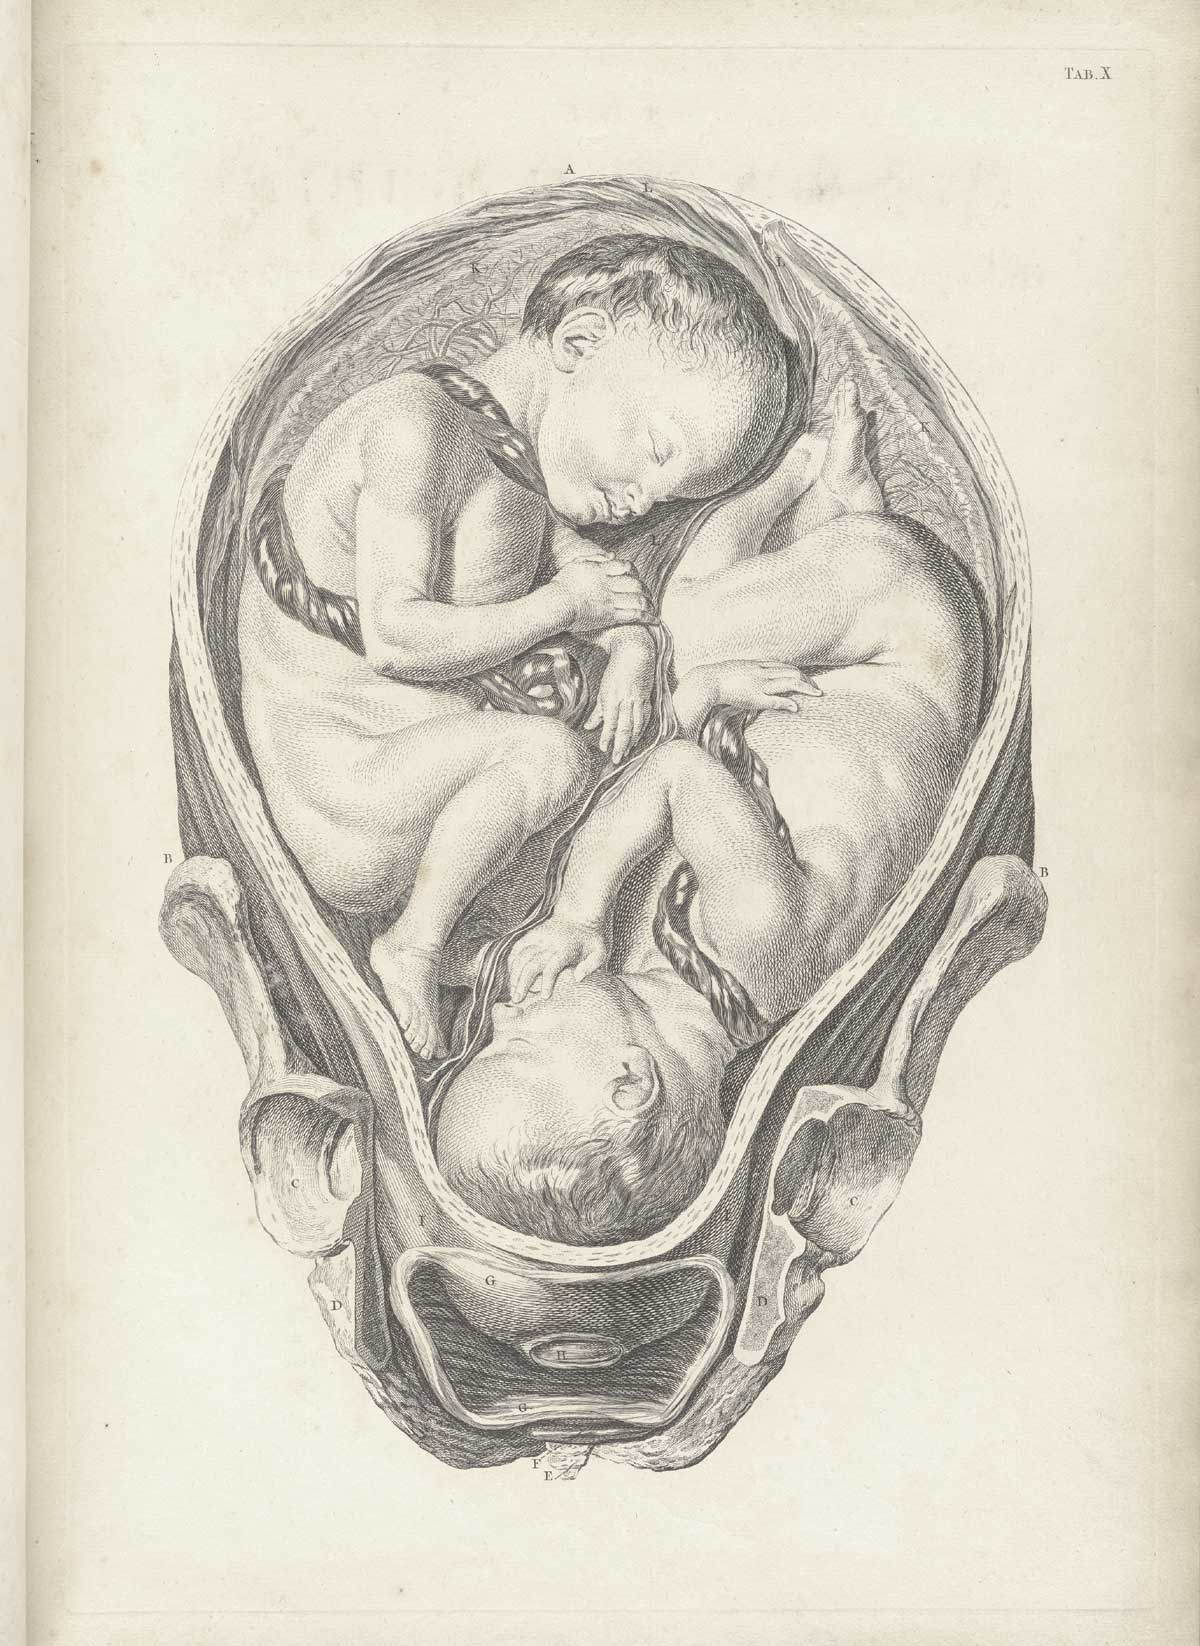 Explanations, and an abridgment, of the practice of midwifery, featuring the illustrated drawing of a woman's pelvis and uterus with twin fetus.